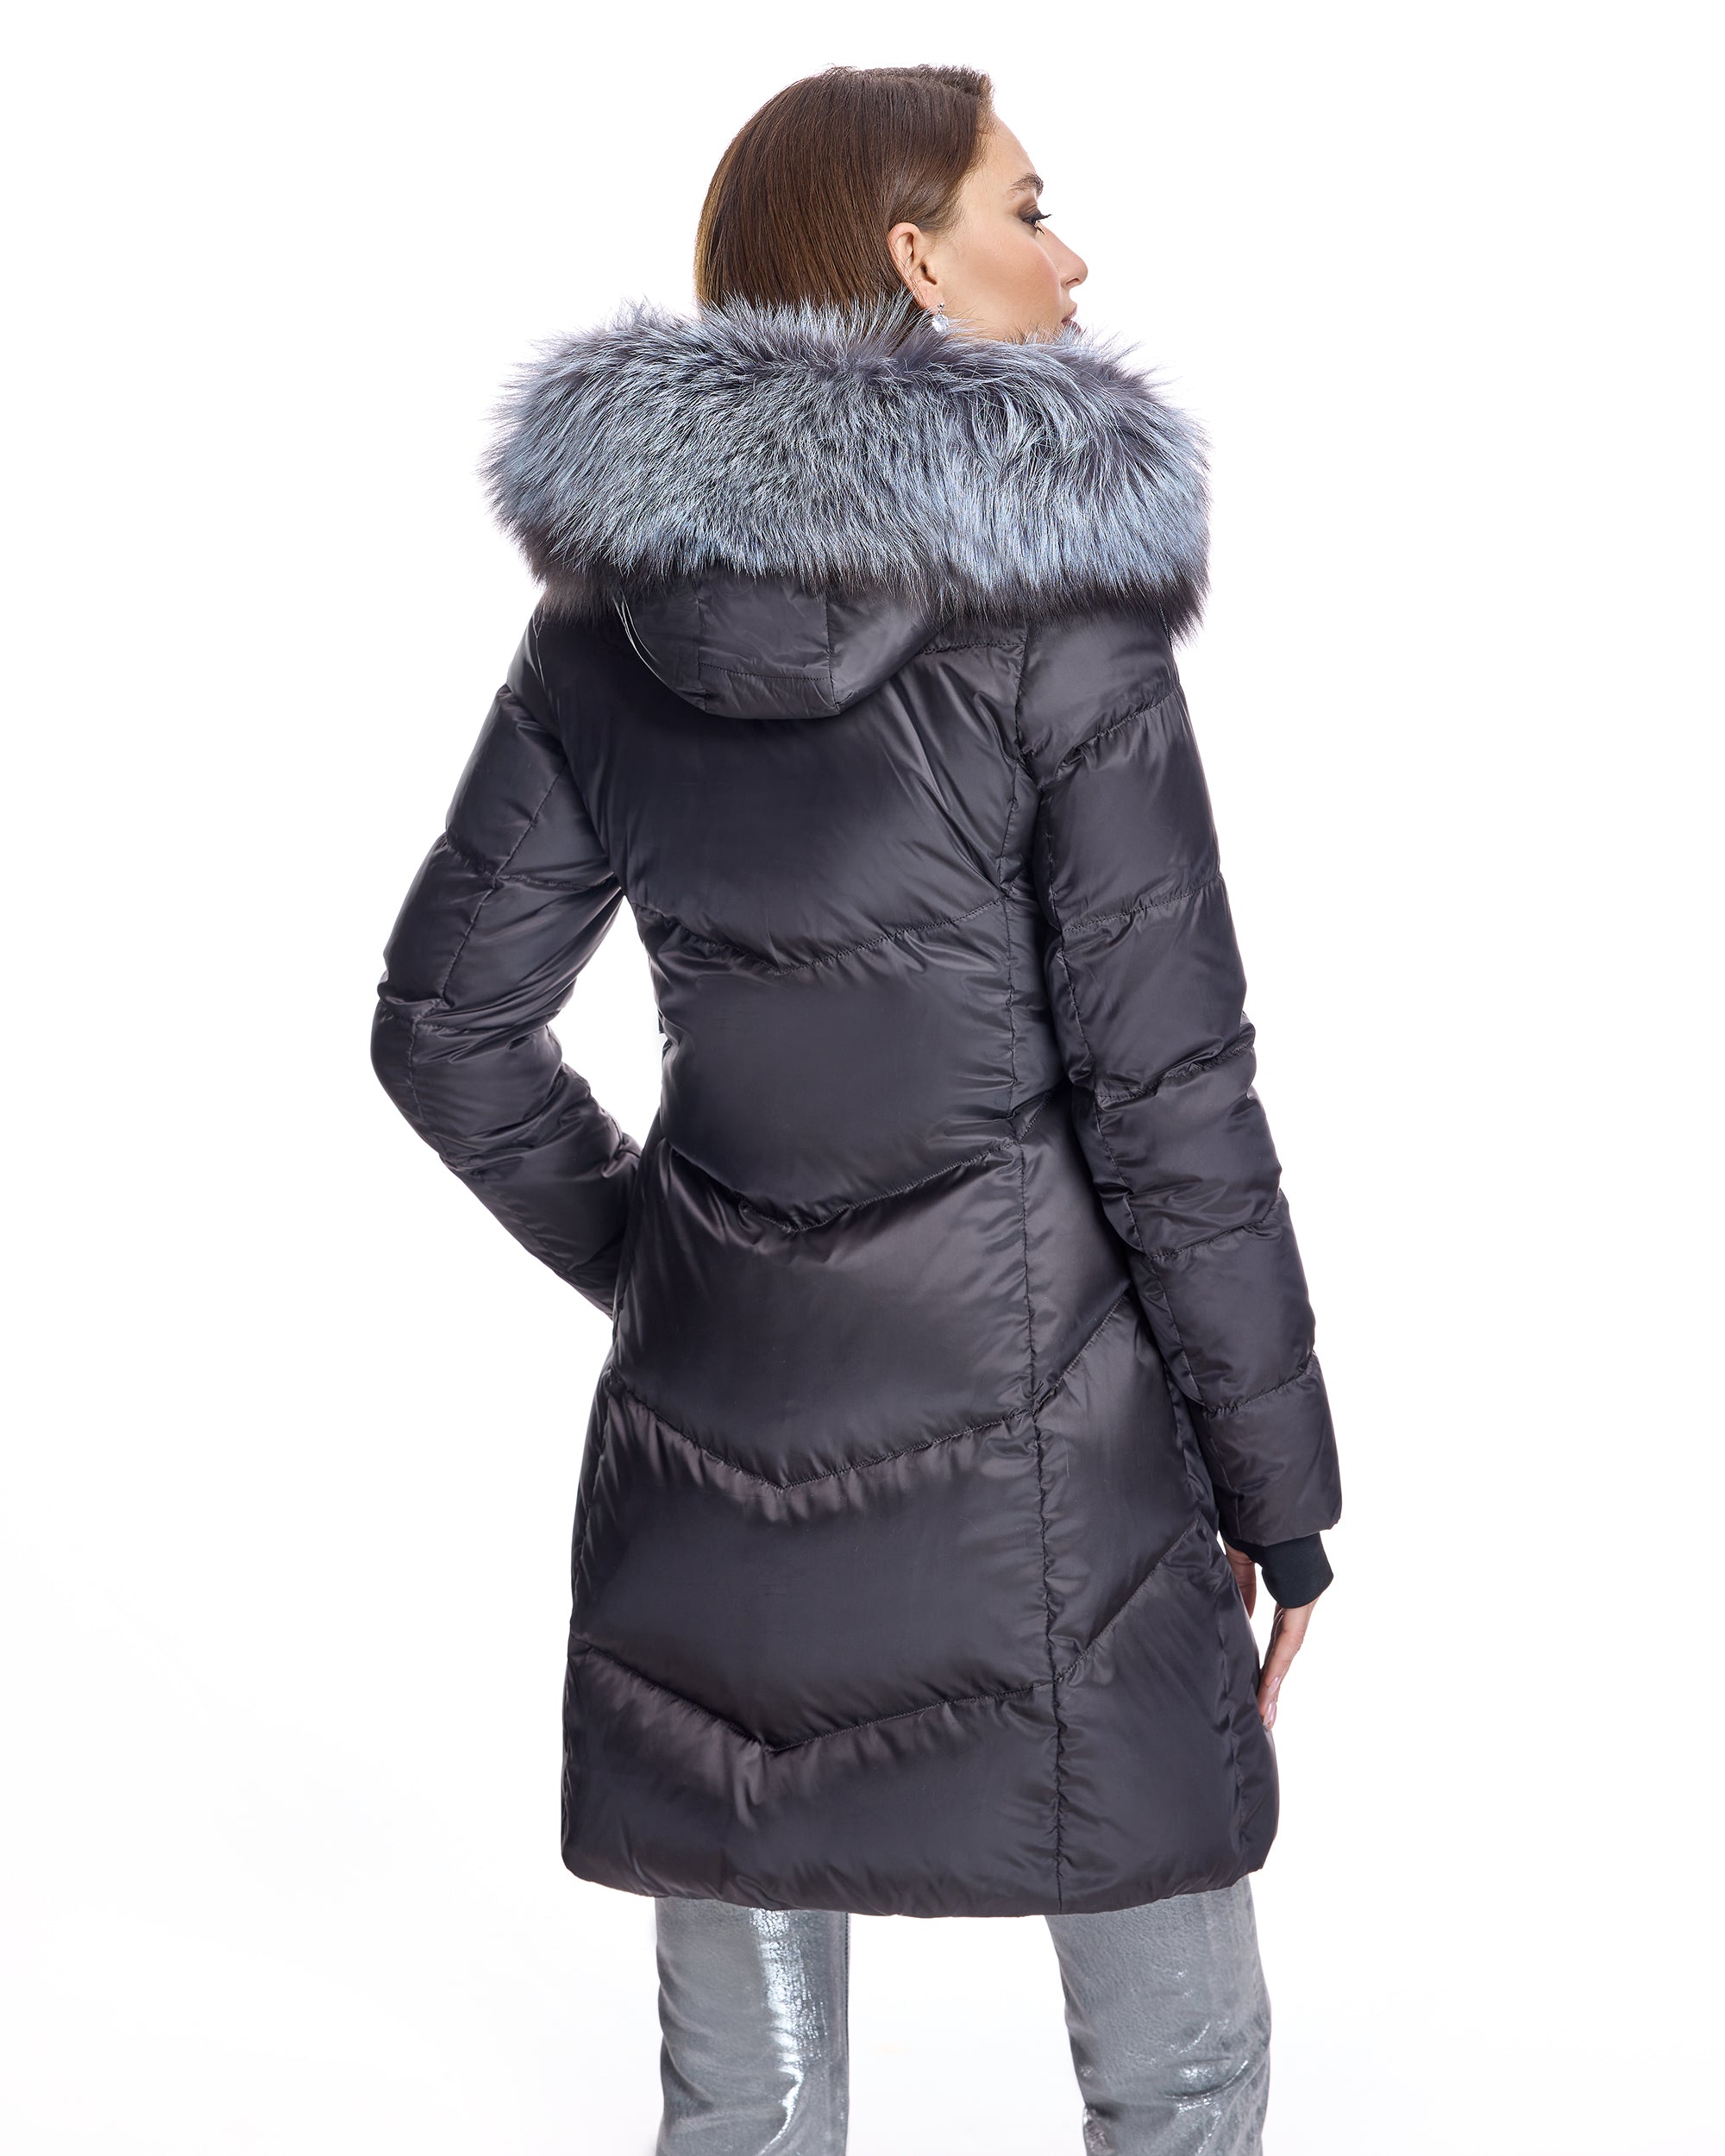 Polyblend Jacket with Silver Fox Trimmed Hood